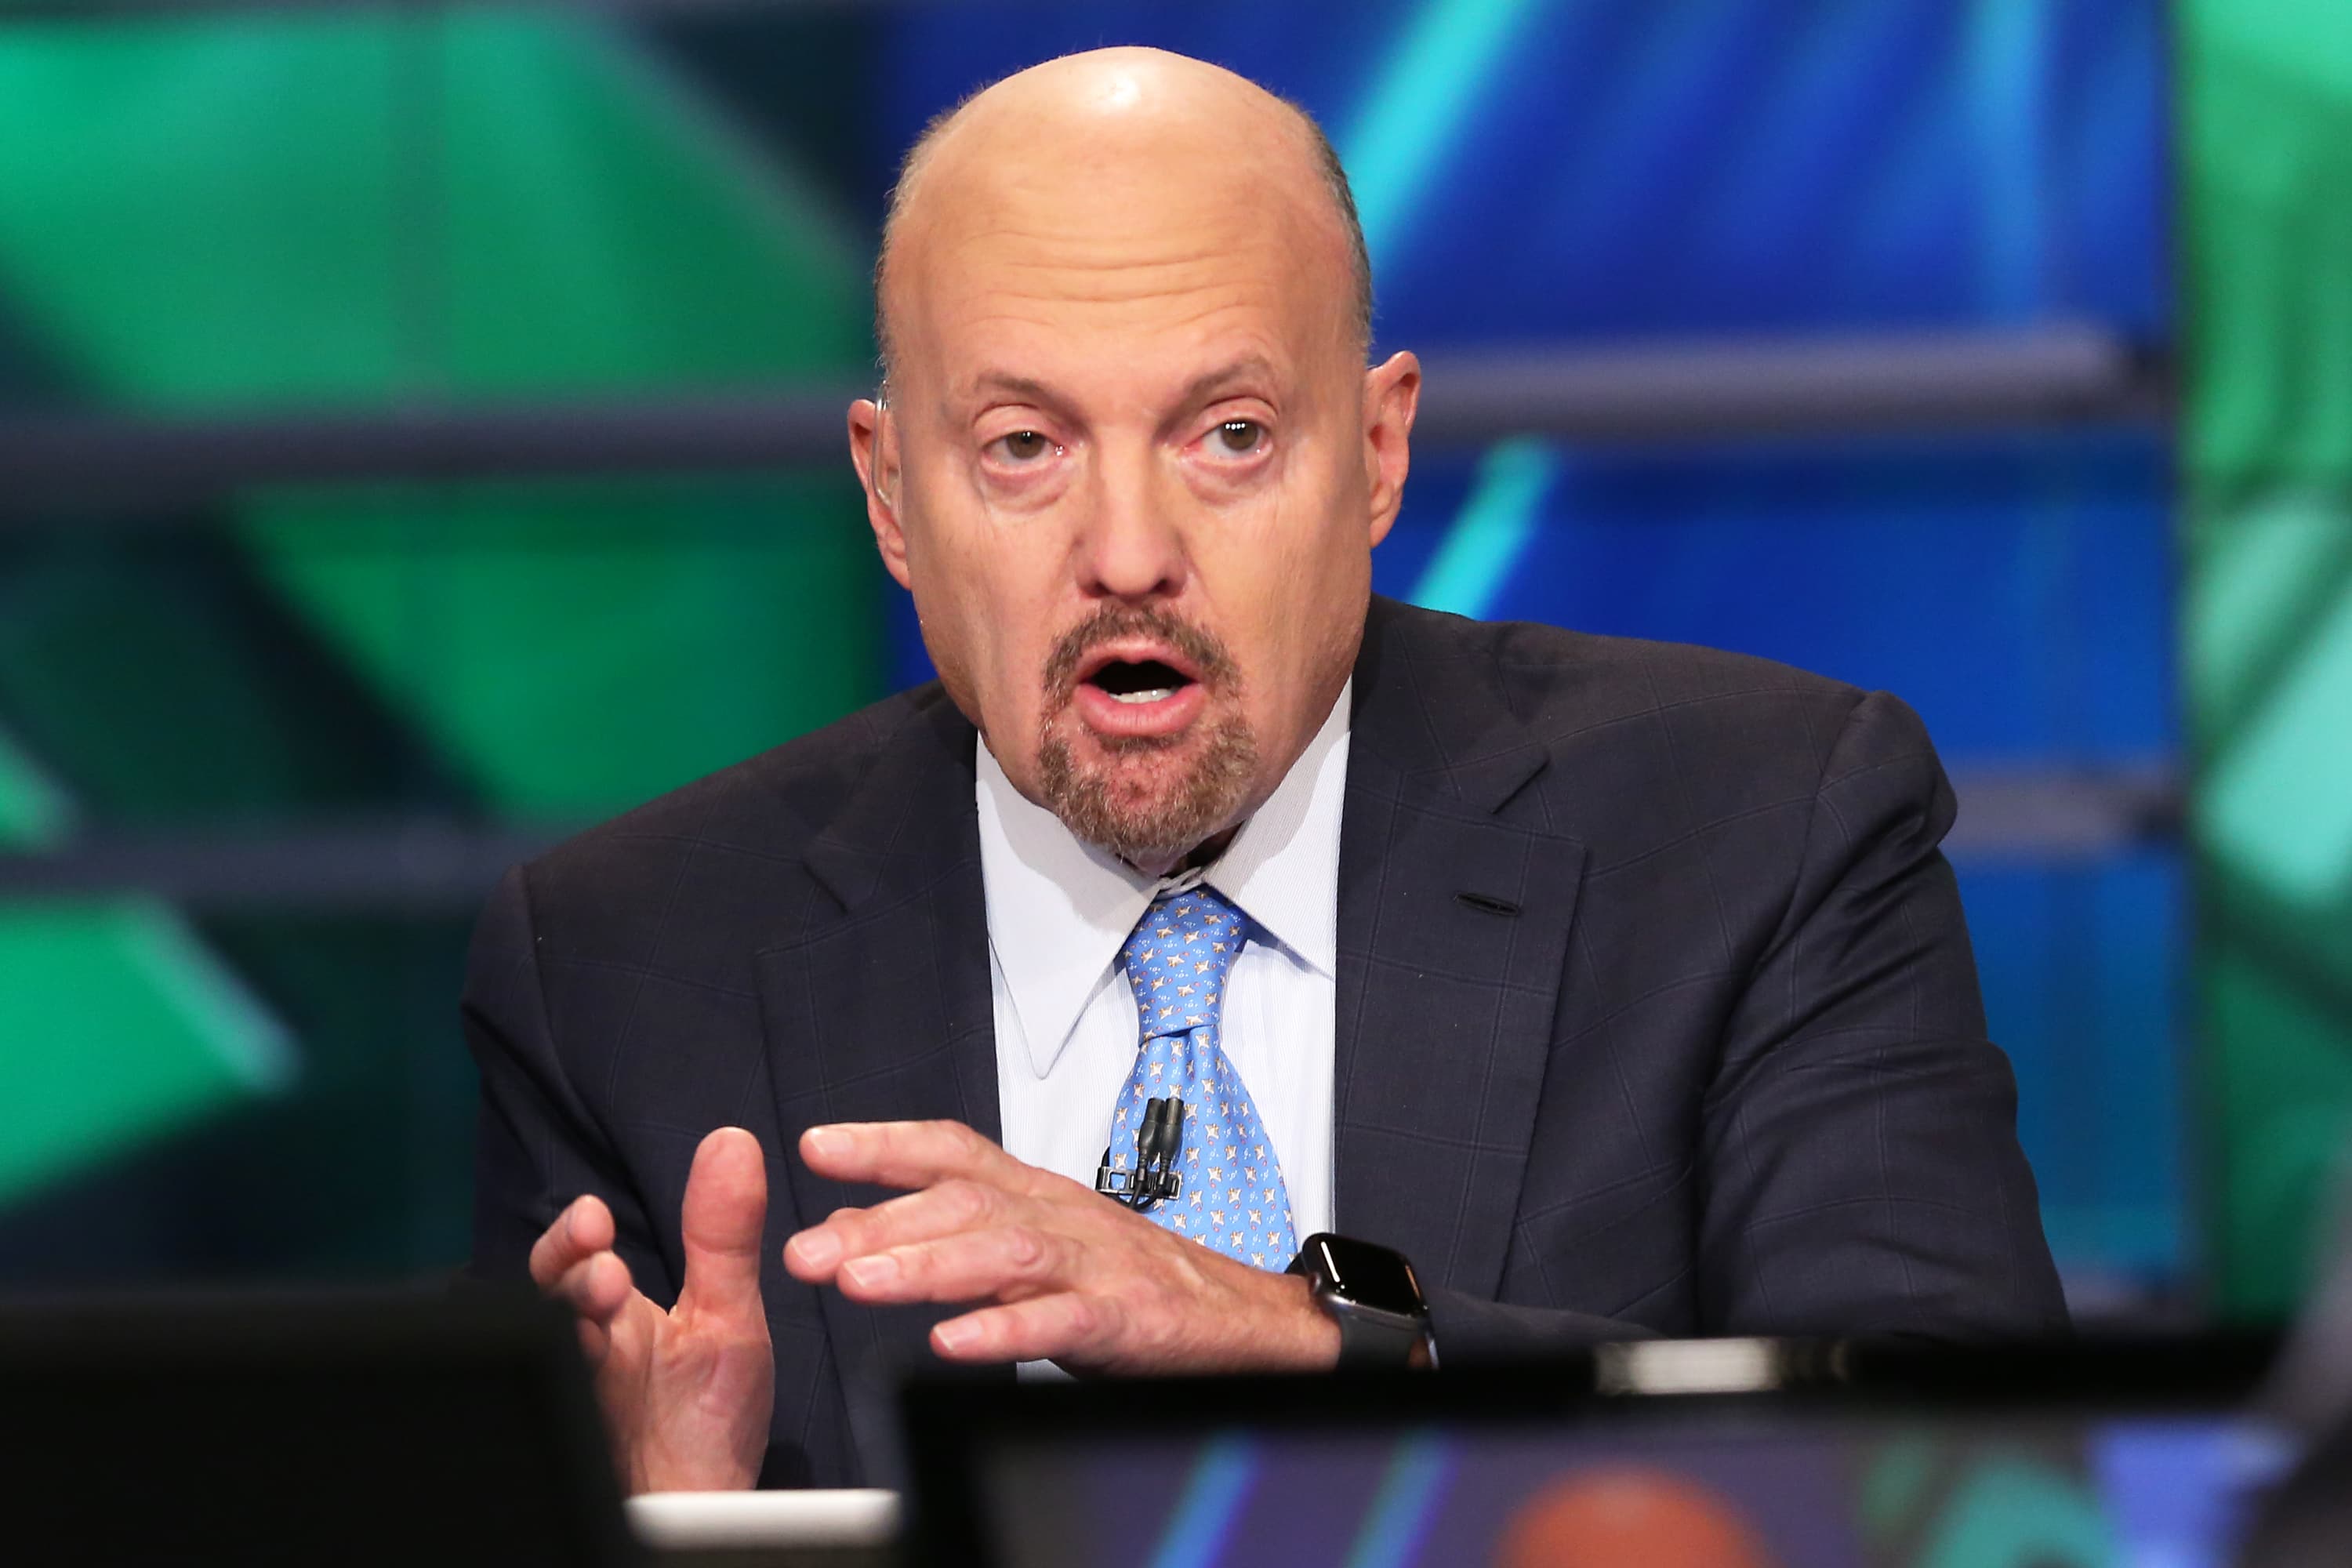 Jim Cramer's Investing Club meeting Monday: Industrials, buying tech, Eli Lilly